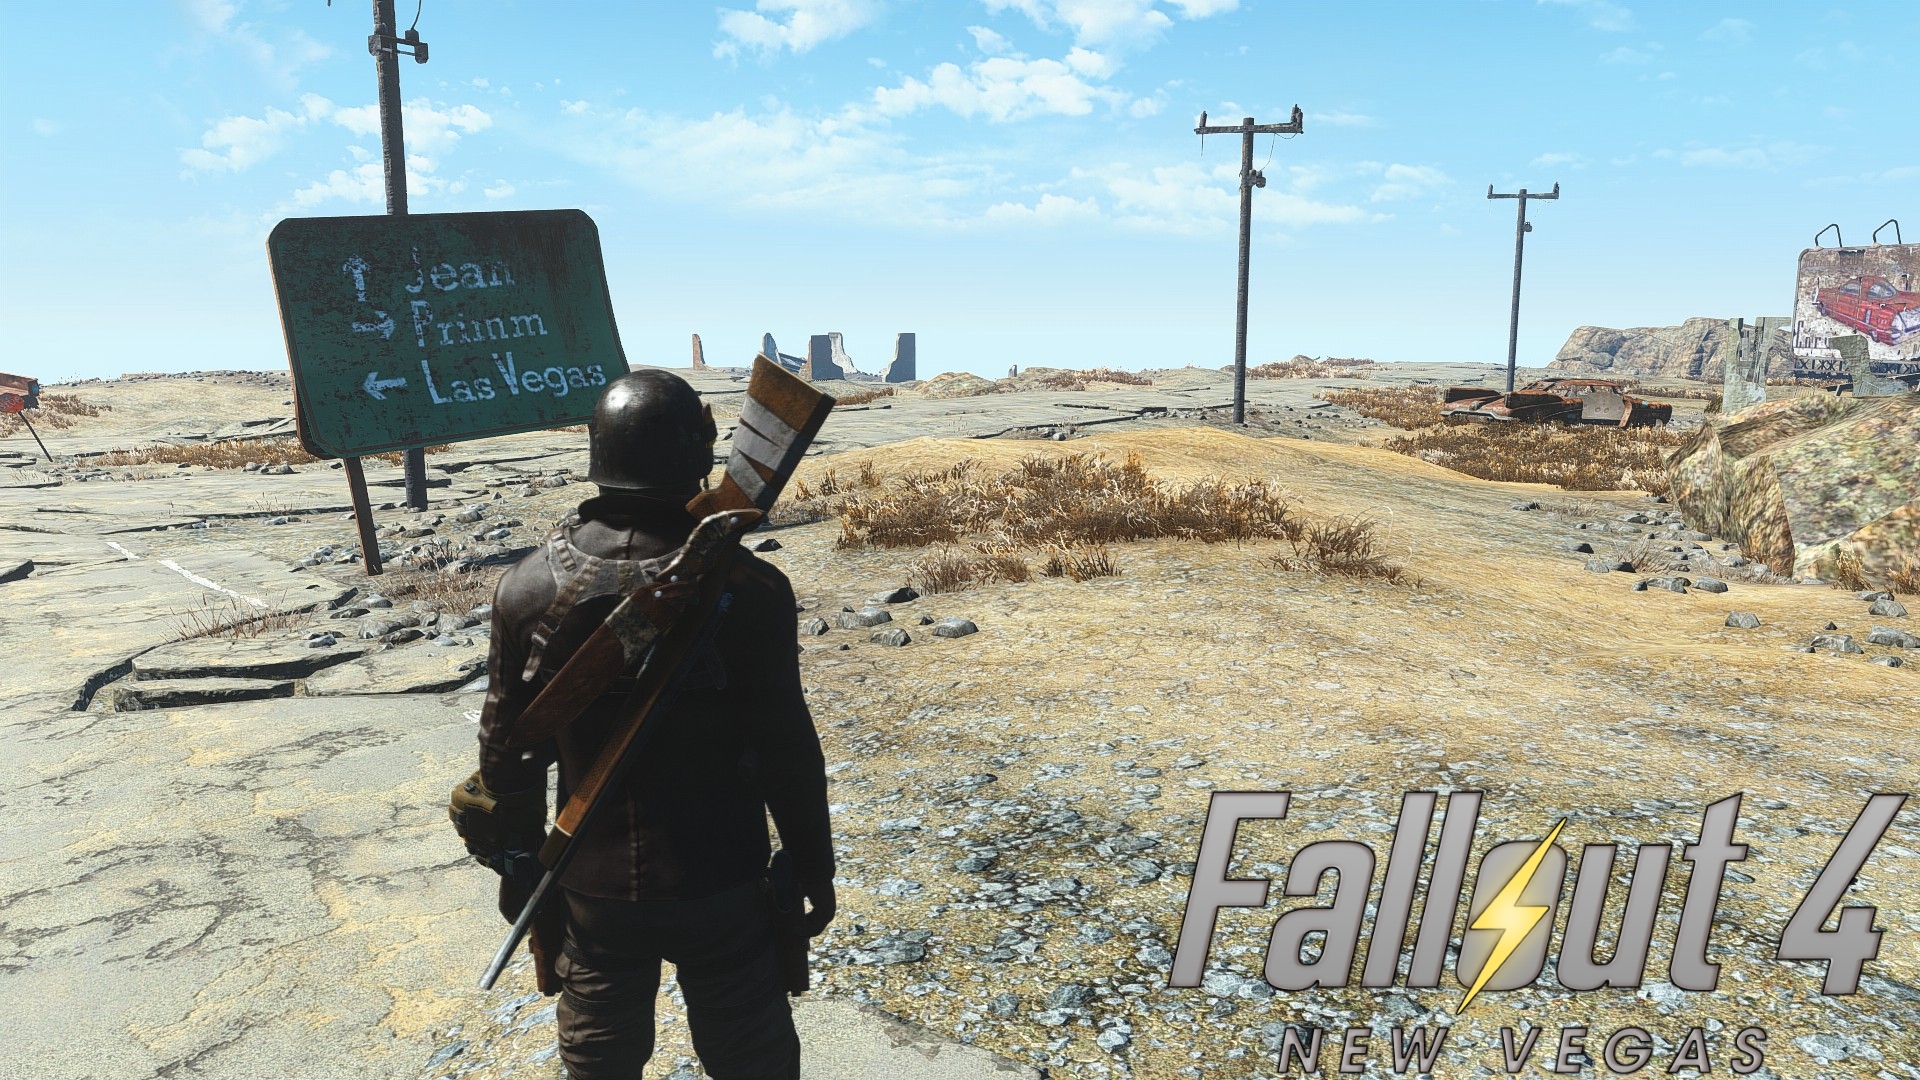 Fallout 4 New Vegas Update Addresses Settlement Conflicts